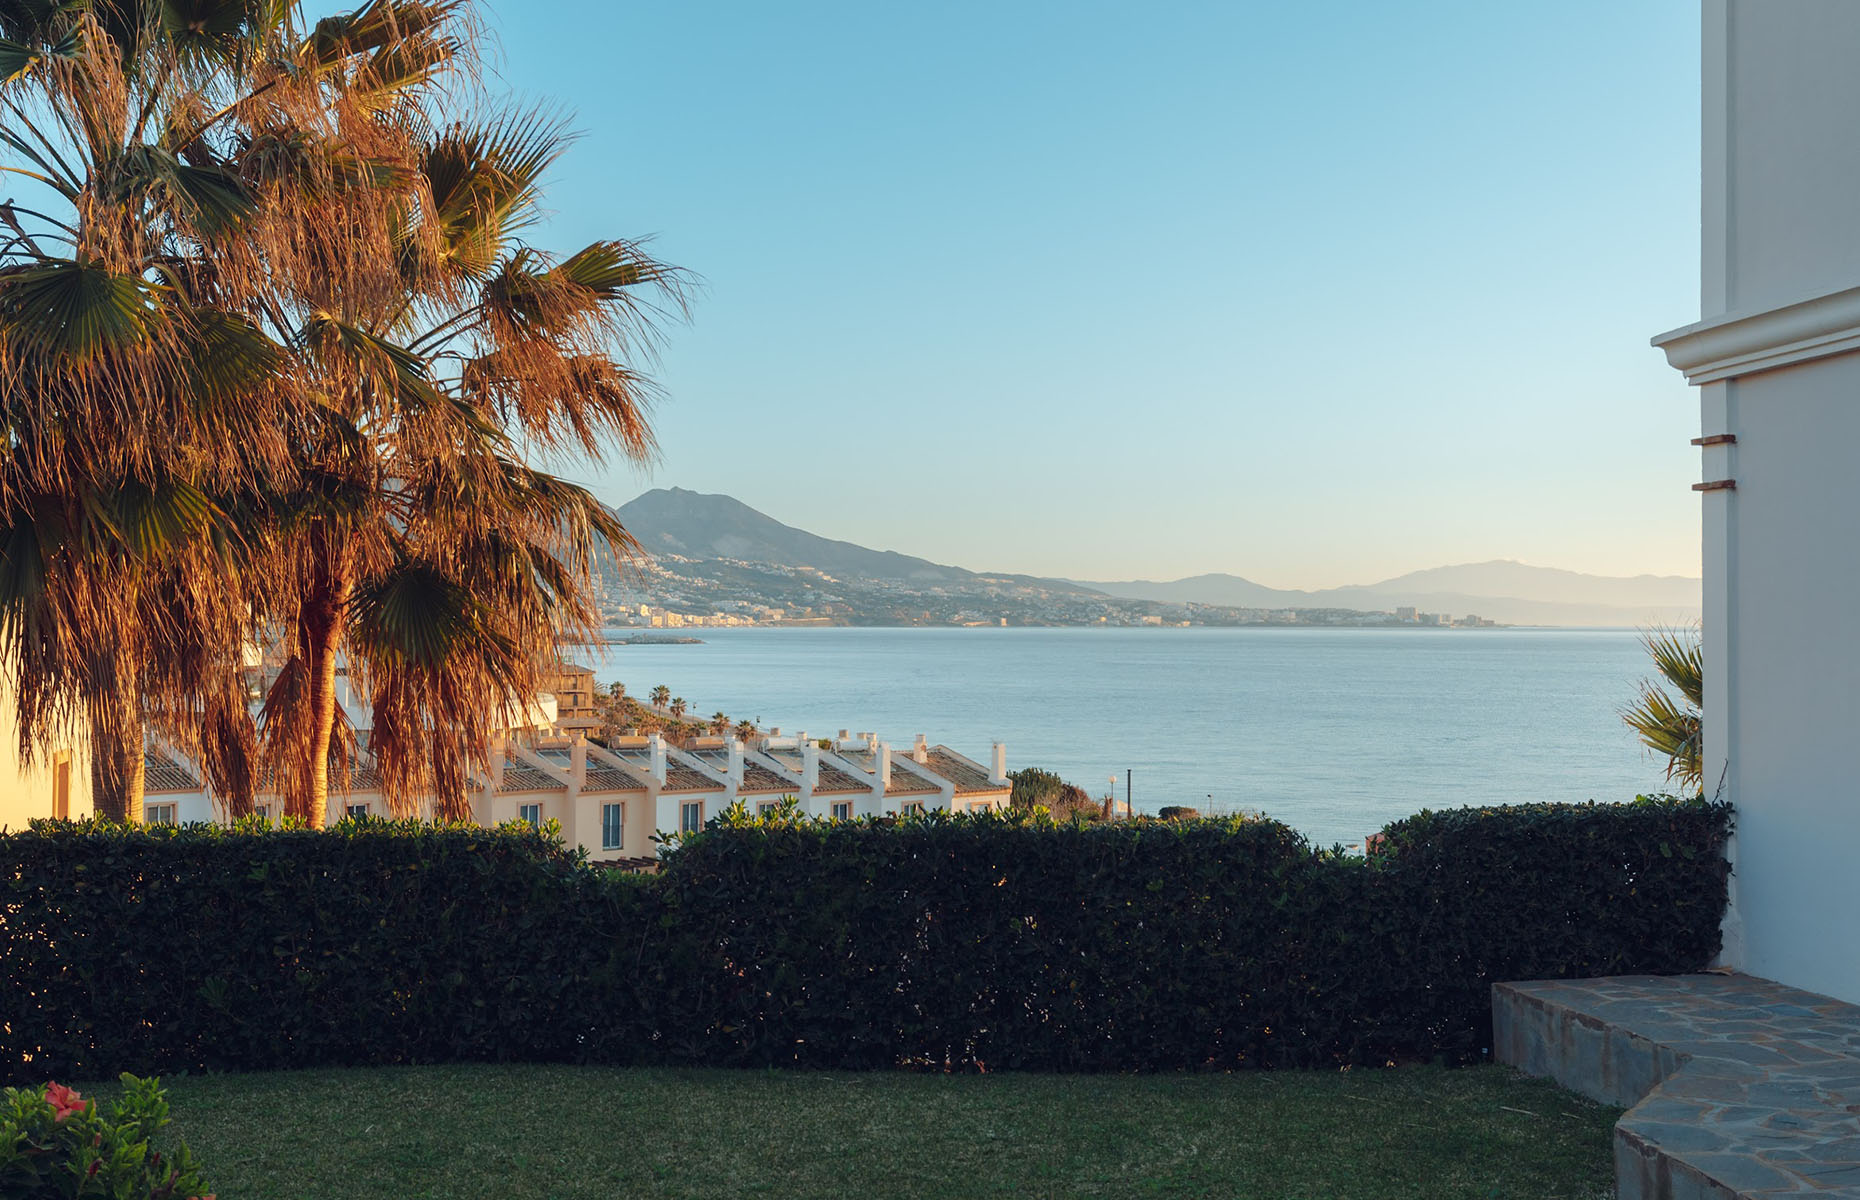 Outlook from the Ramada Hotels & Suites on the Costa del Sol